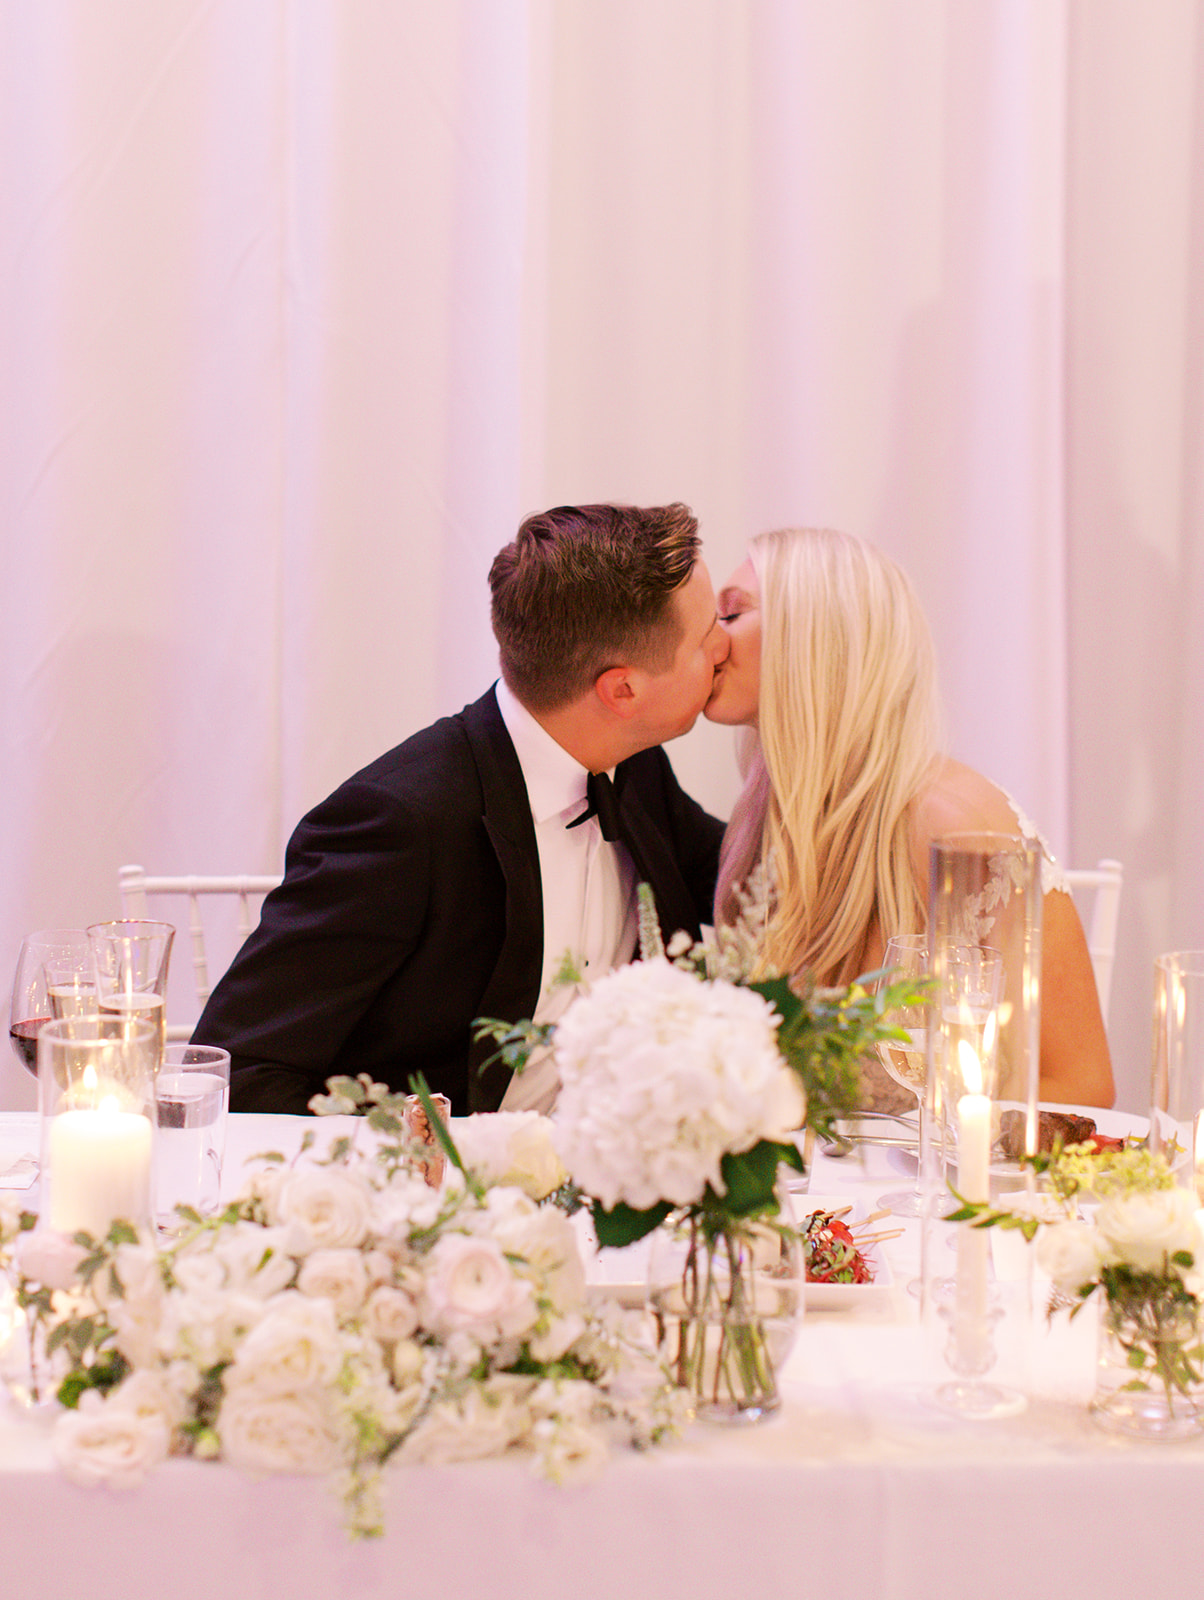 Bride and groom kissing at table